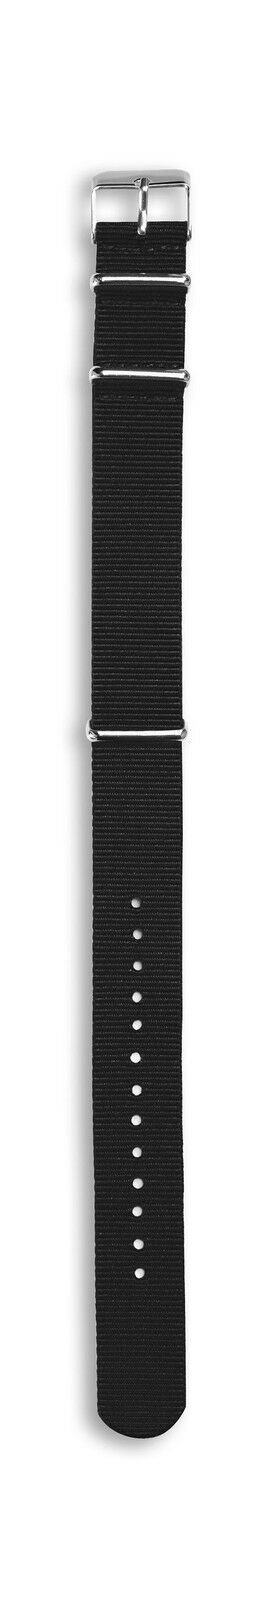 Compass Spare Fabric Watch Strap - Black 987694547